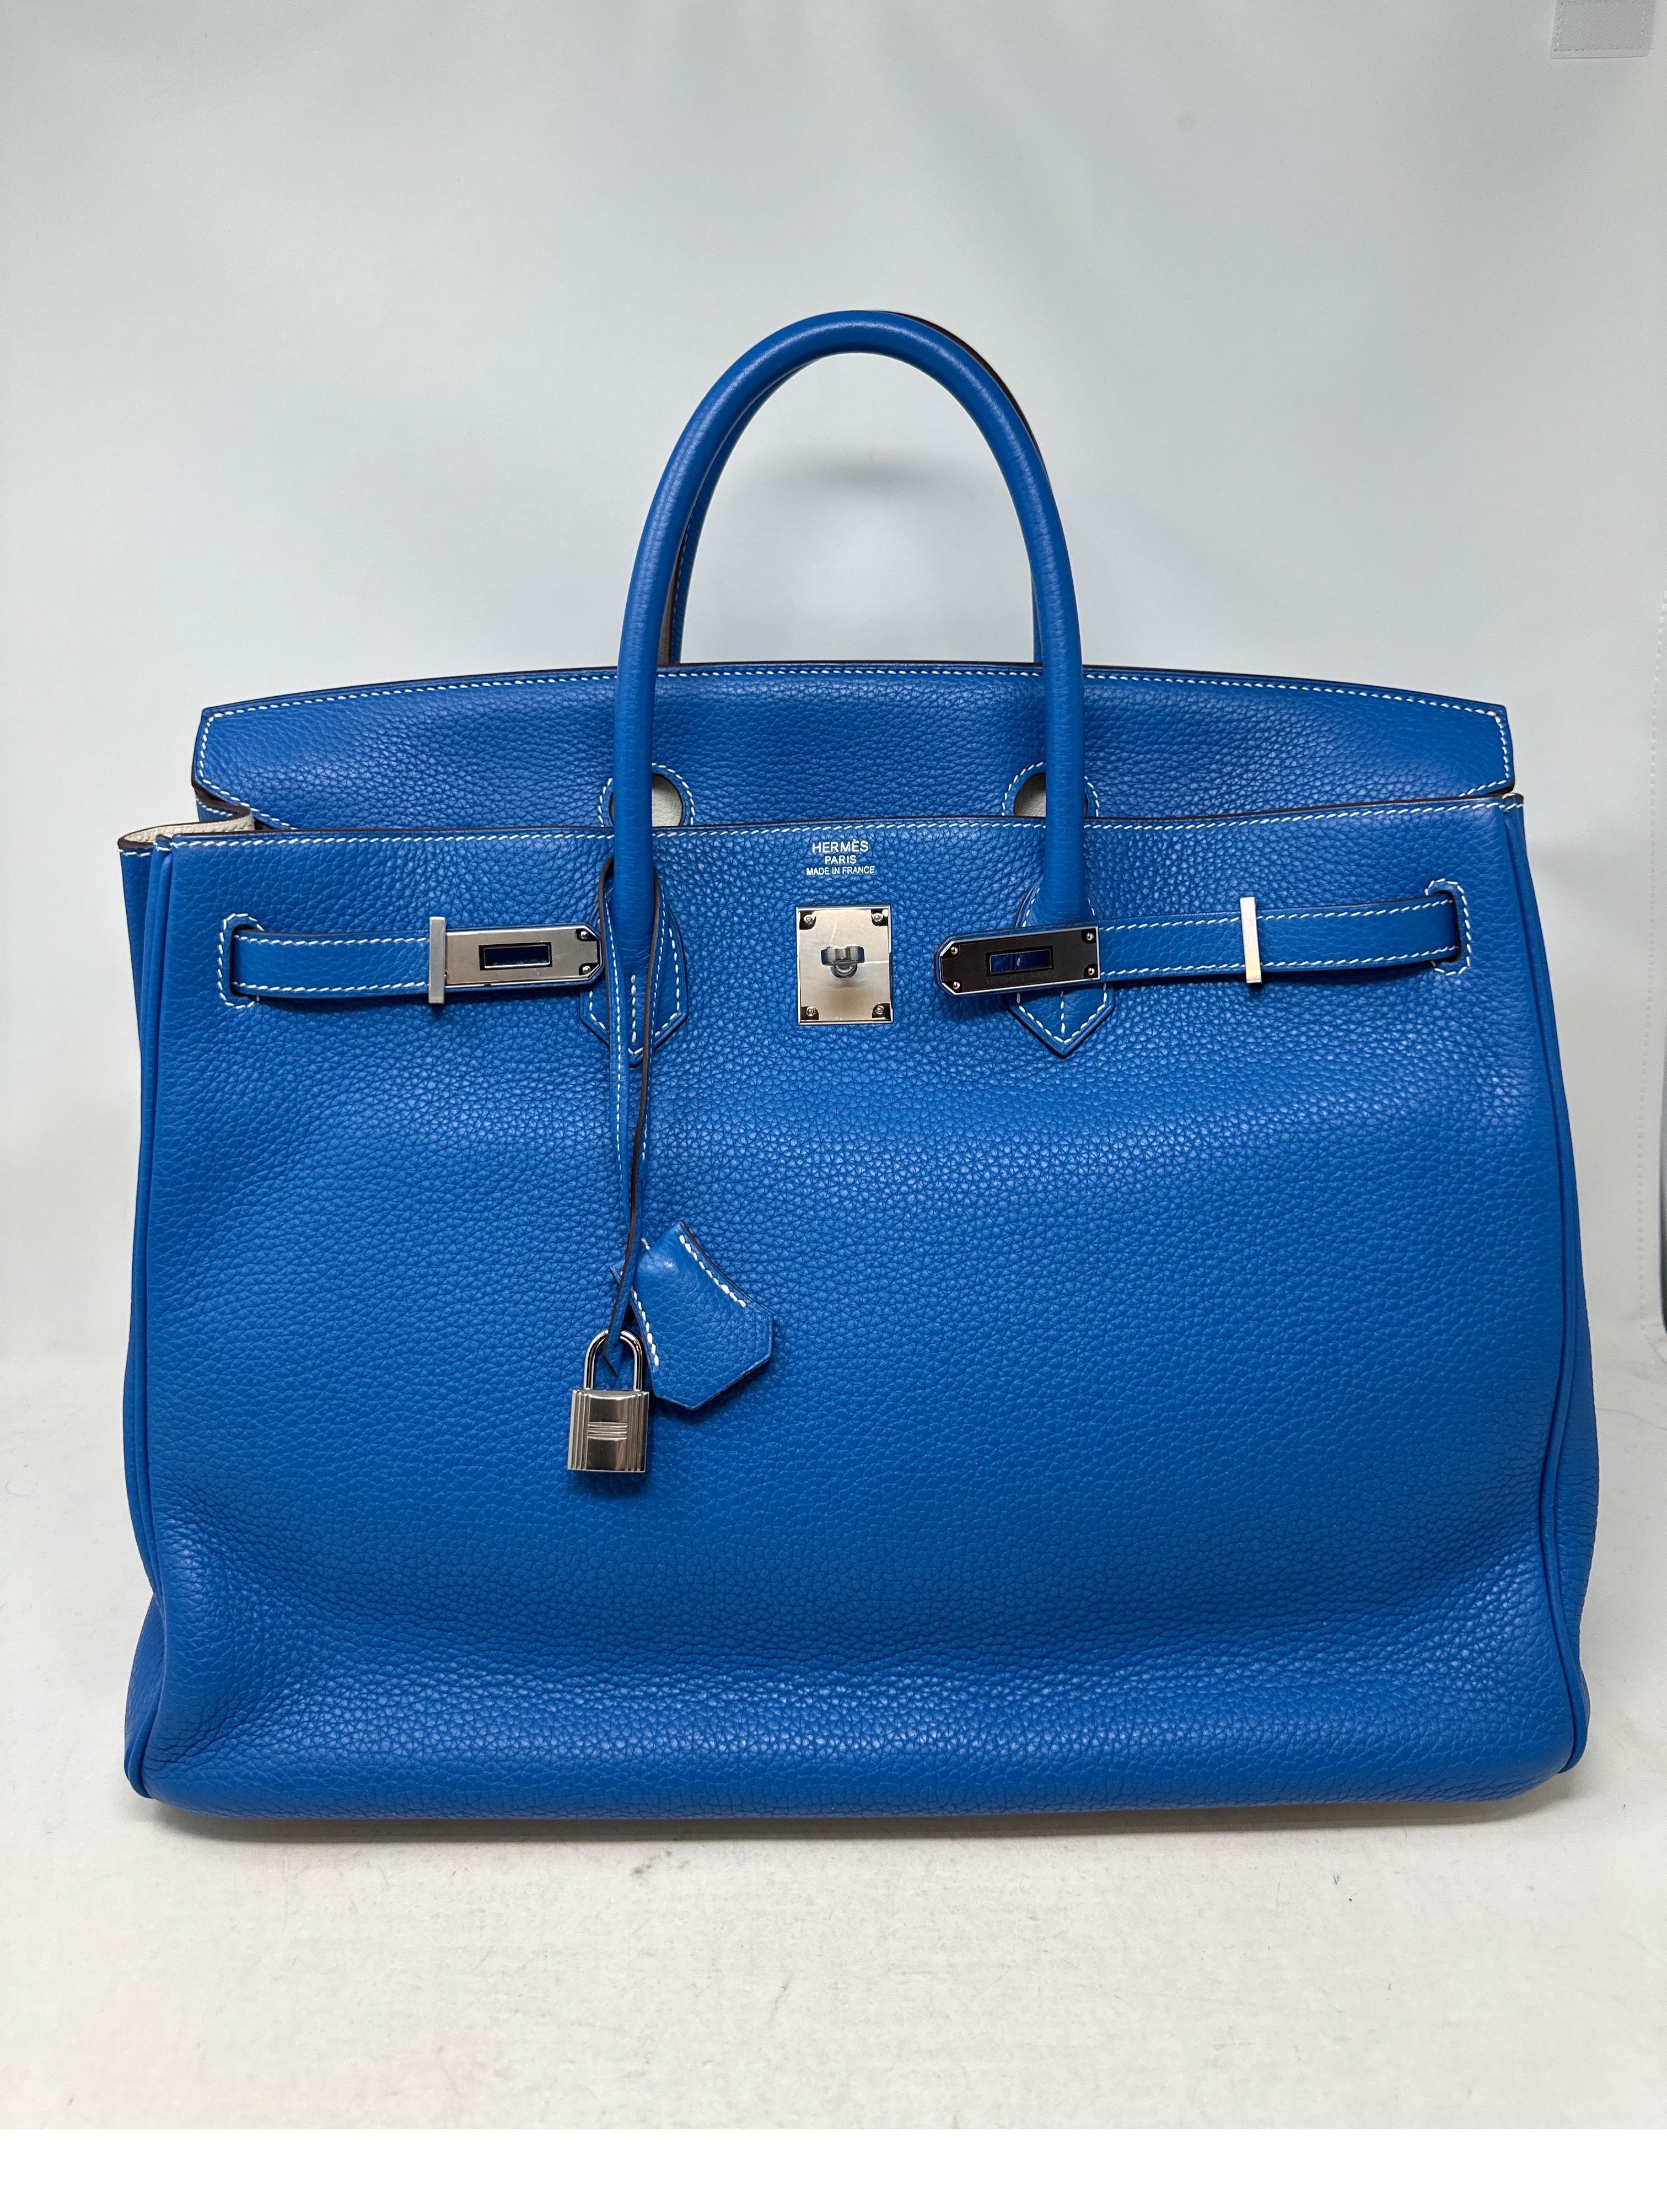 Hermes Birkin 40 Blue Mykonos Bag. Gorgeous blue exterior bag with white interior and bottom of bag. Special two-tone Birkin. Rare big 40 size Birkin. Collector's piece. Excellent condition. Plastic is still on the hardware. Includes clochette,